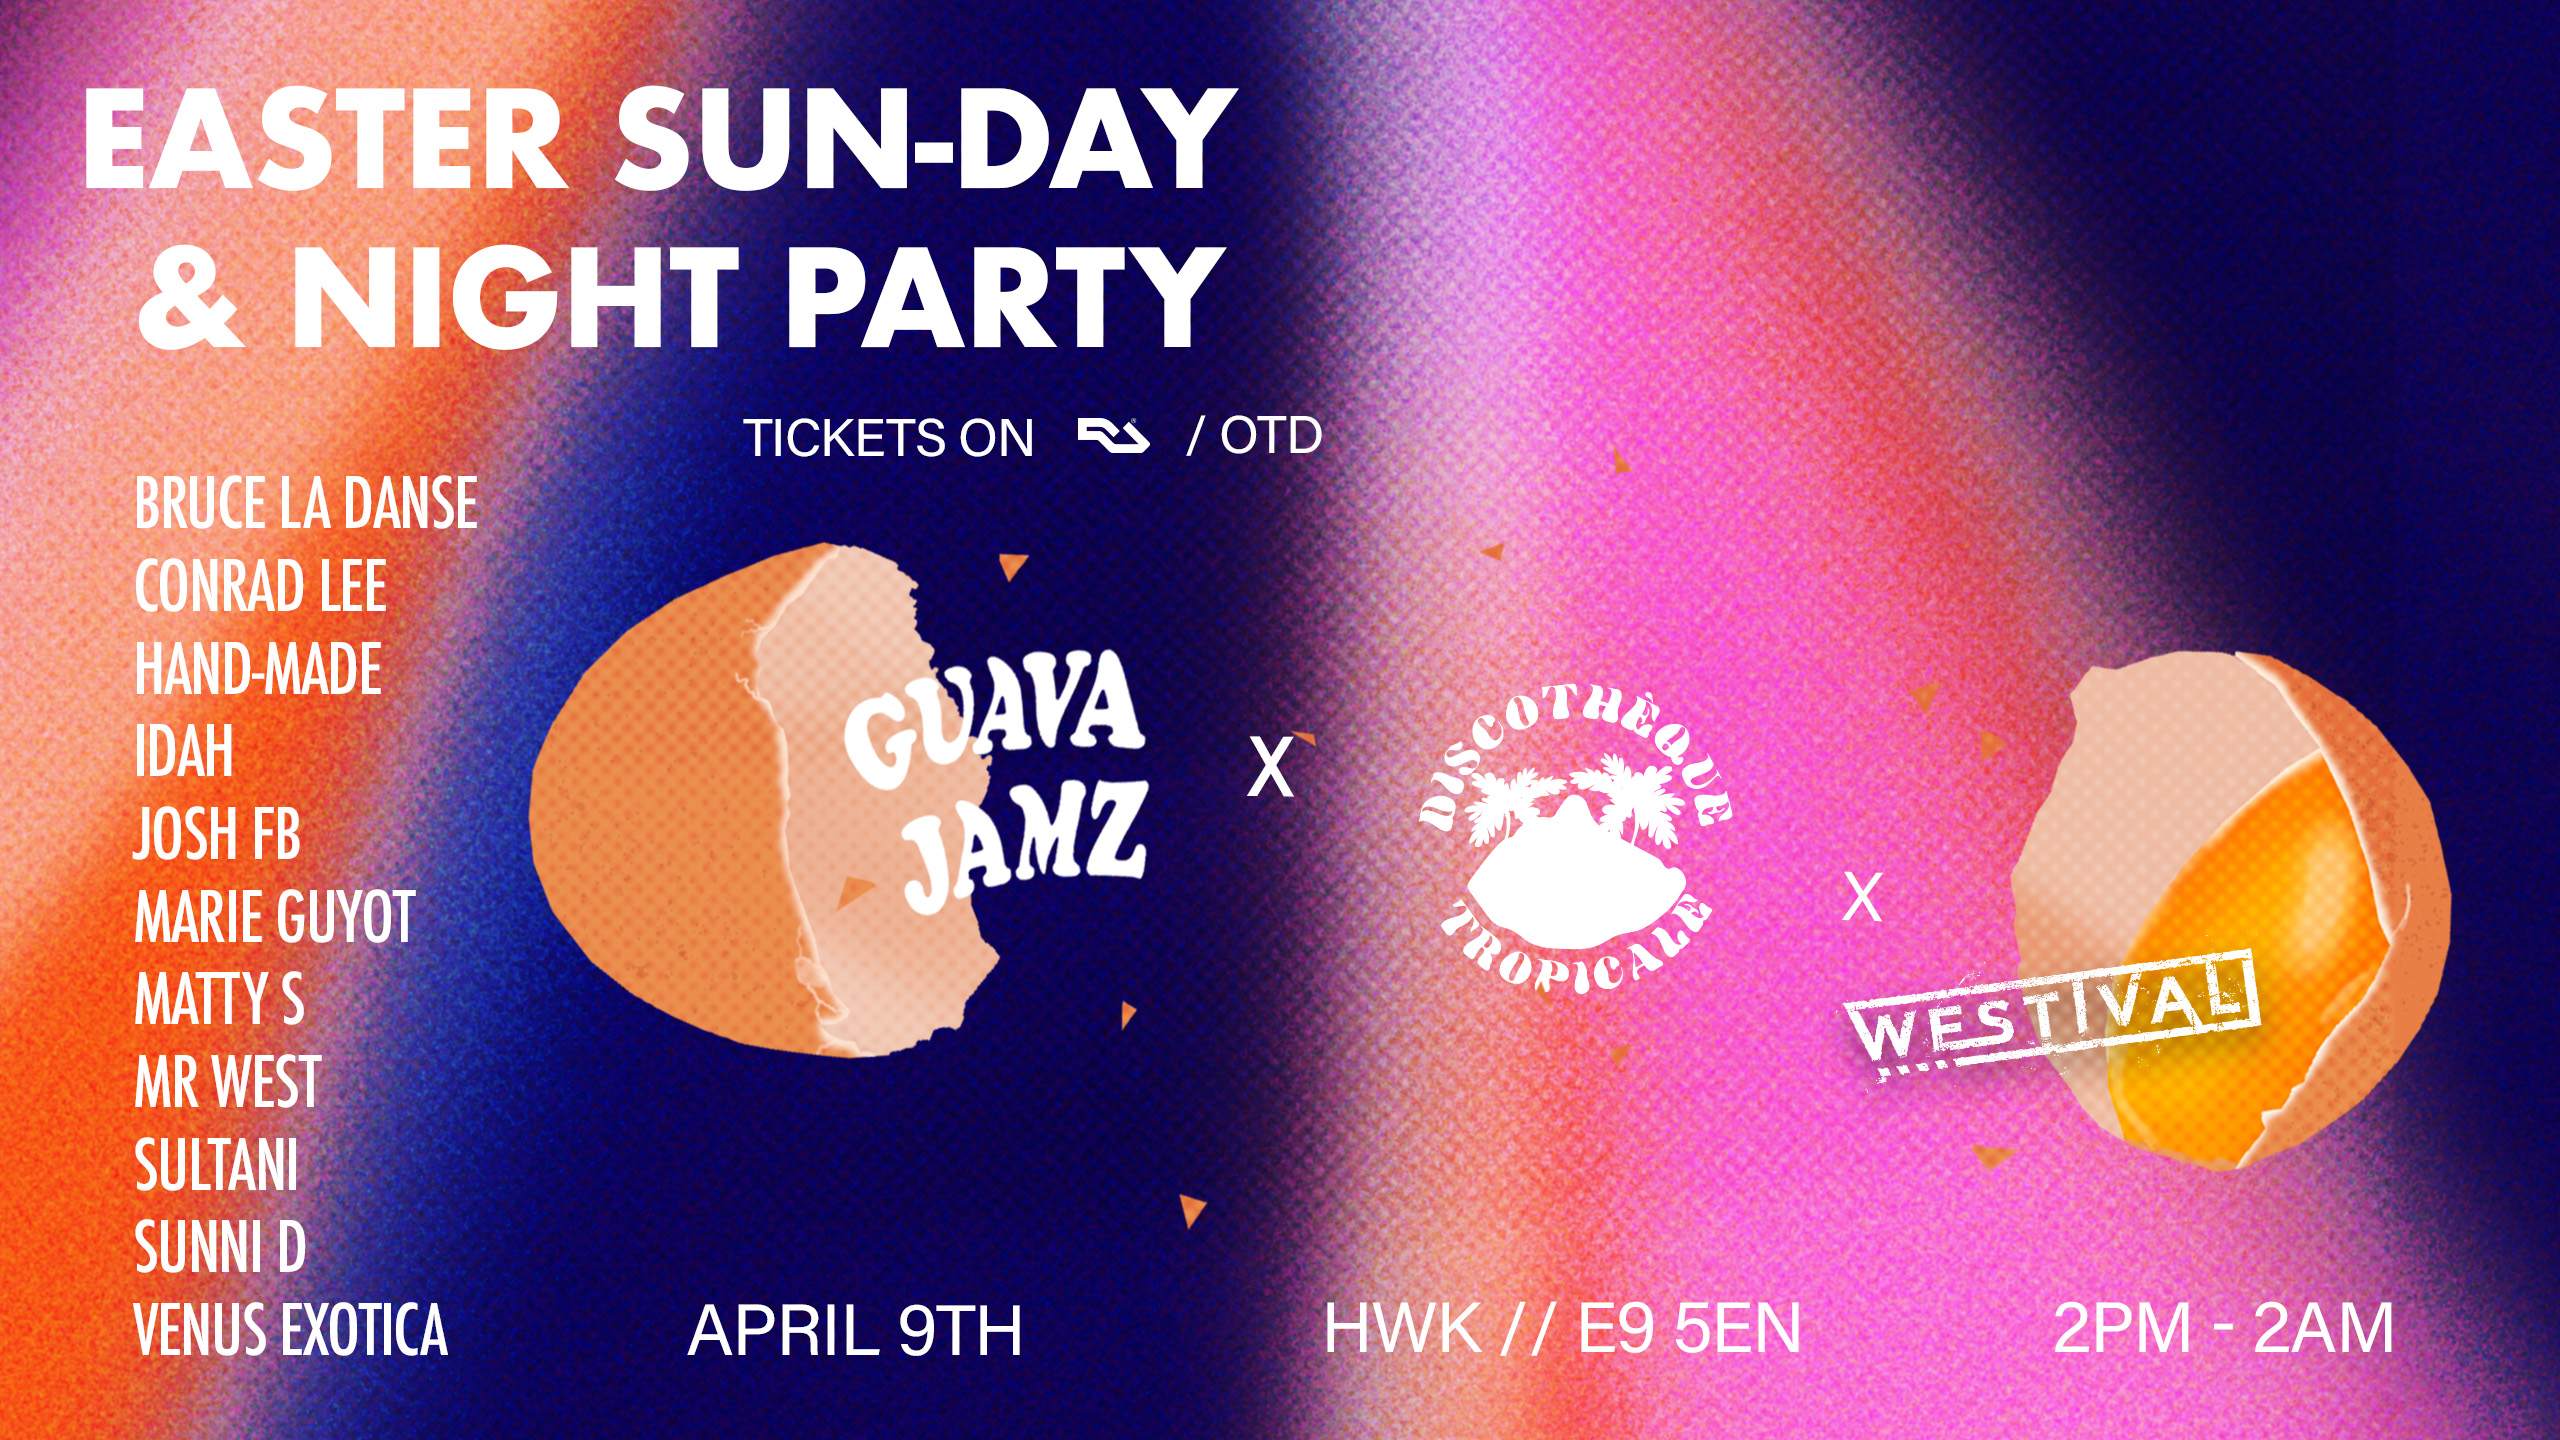 Easter Sunday & Night Party - フライヤー表